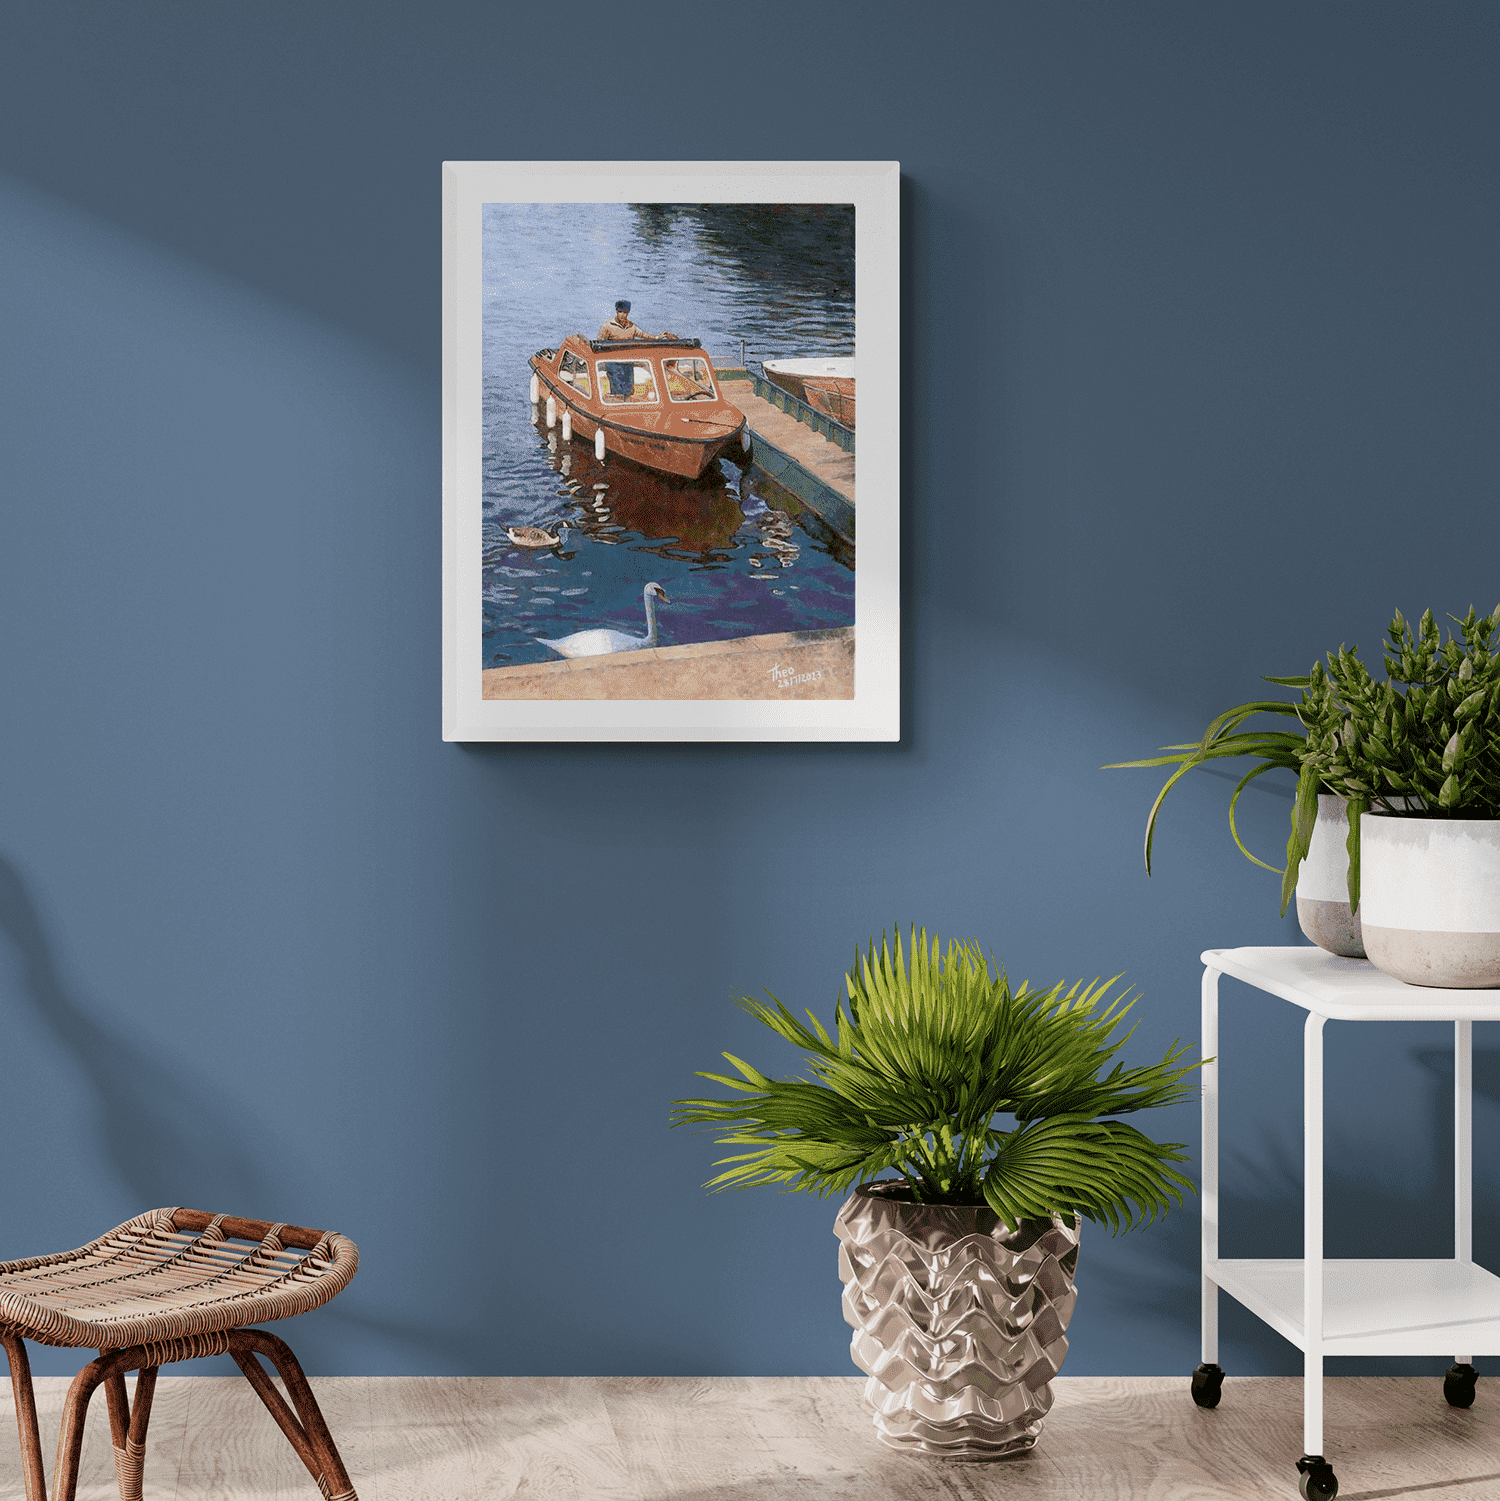 Fine Art print of a boat painting on the River Thames by Theo Michael titled Boat For Hire